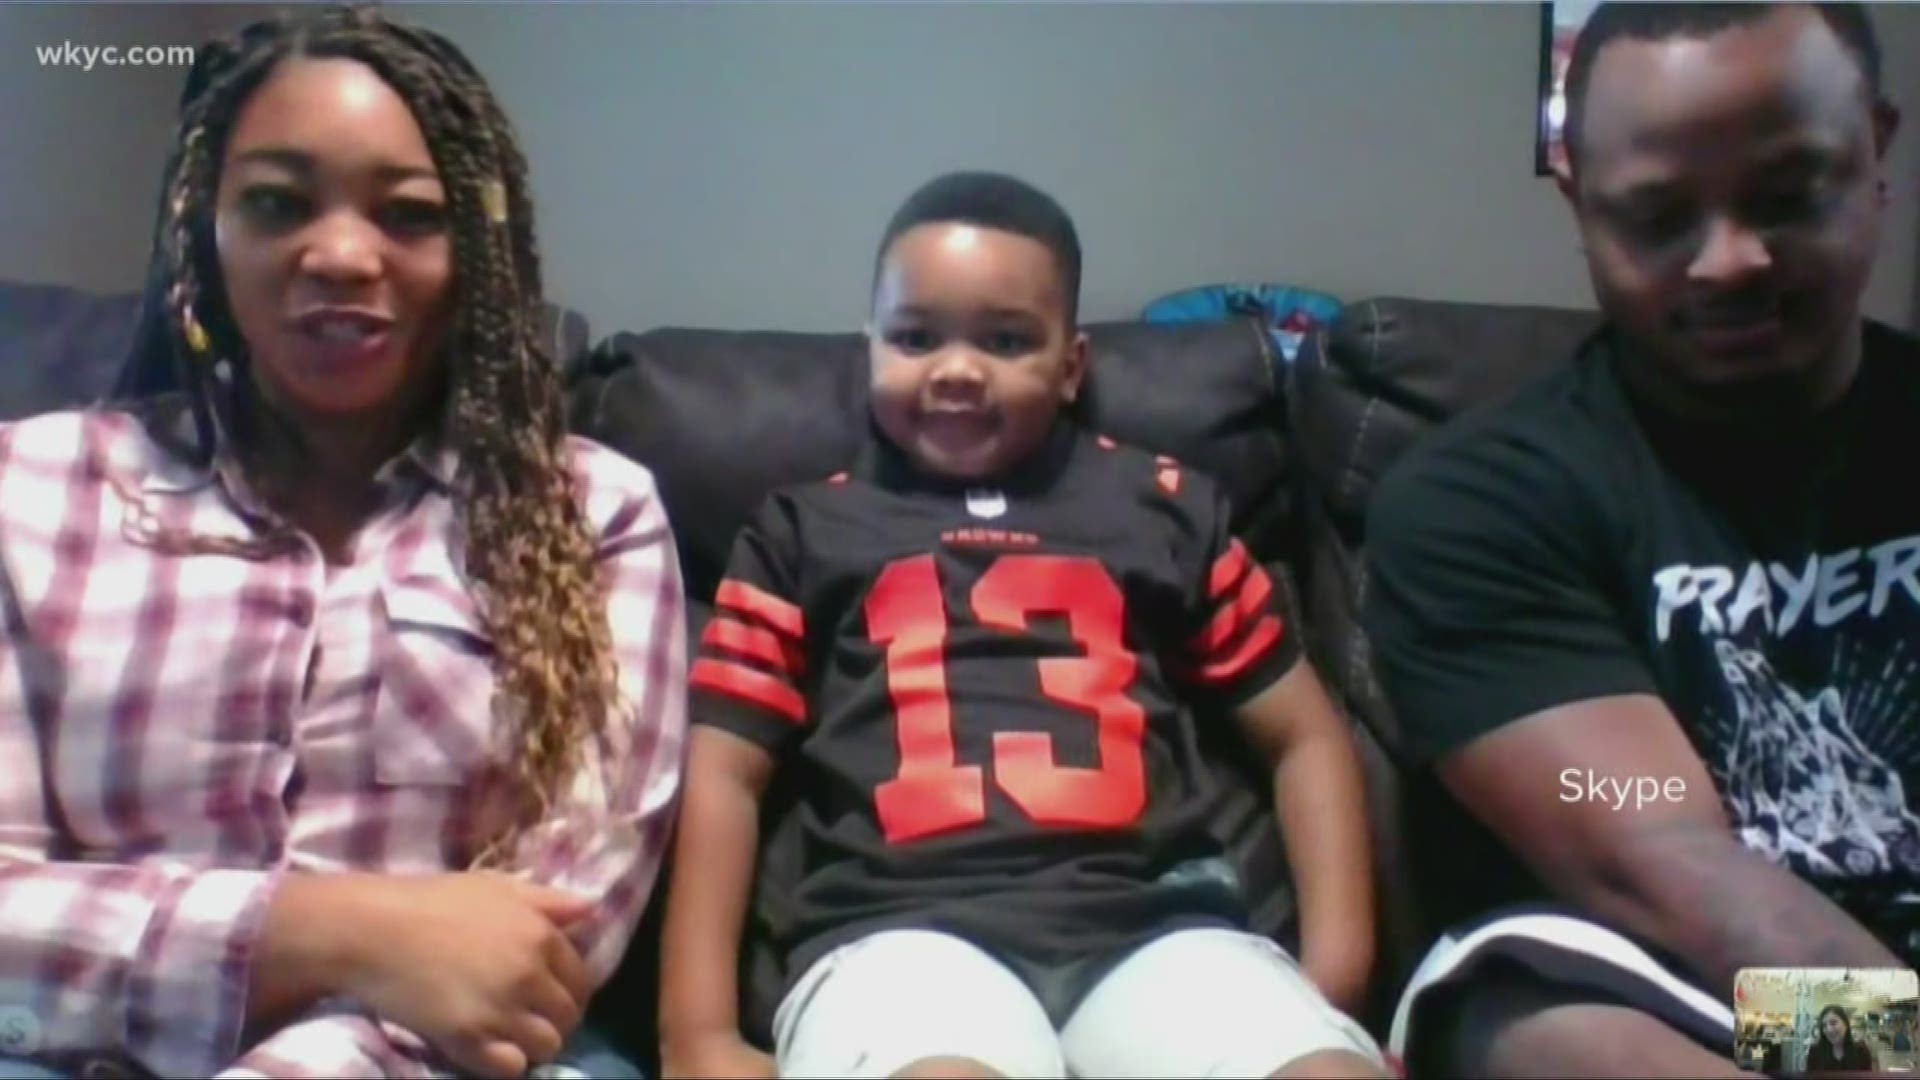 It was a Christmas to remember for one Texas boy. After receiving an OBJ jersey, the boy was again gifted with a response from the star athlete on Twitter.